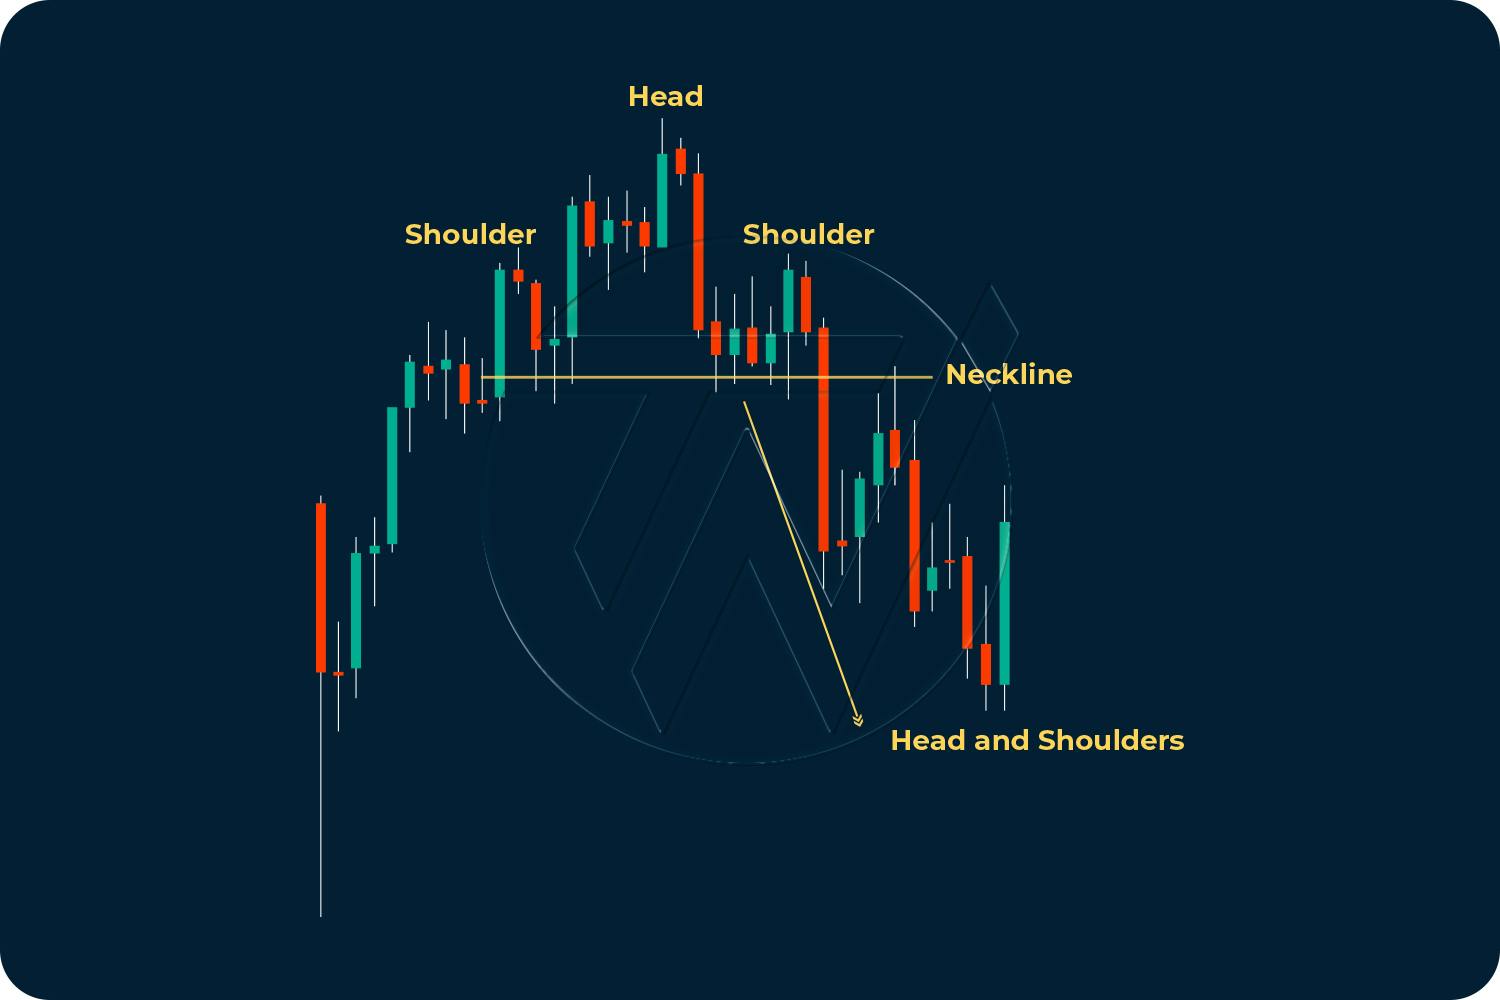 Candlestick chart patterns illustrating head and shoulders